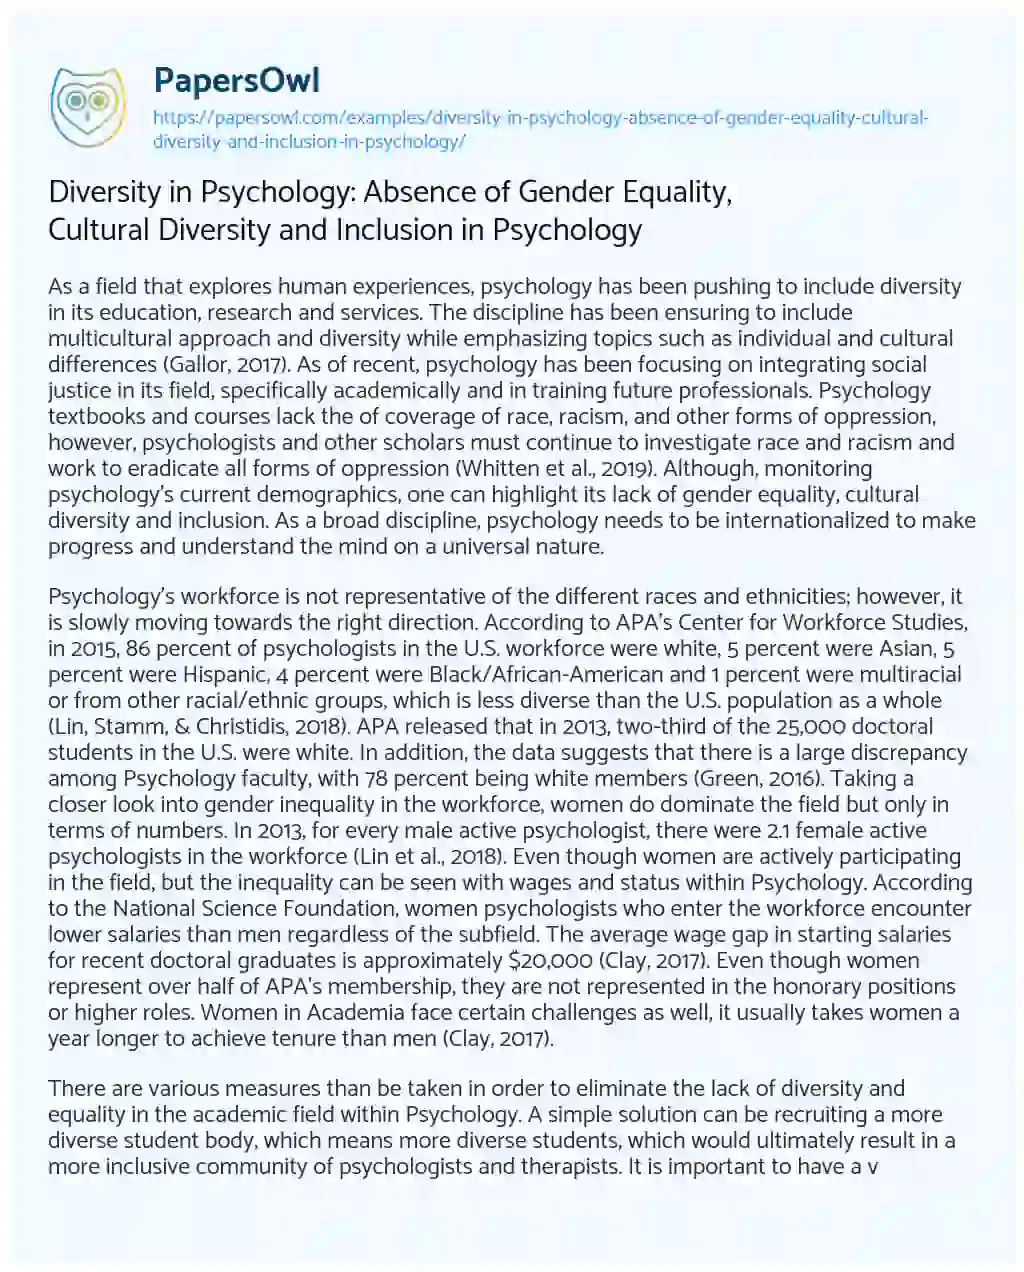 Diversity in Psychology: Absence of Gender Equality, Cultural Diversity and Inclusion in Psychology essay